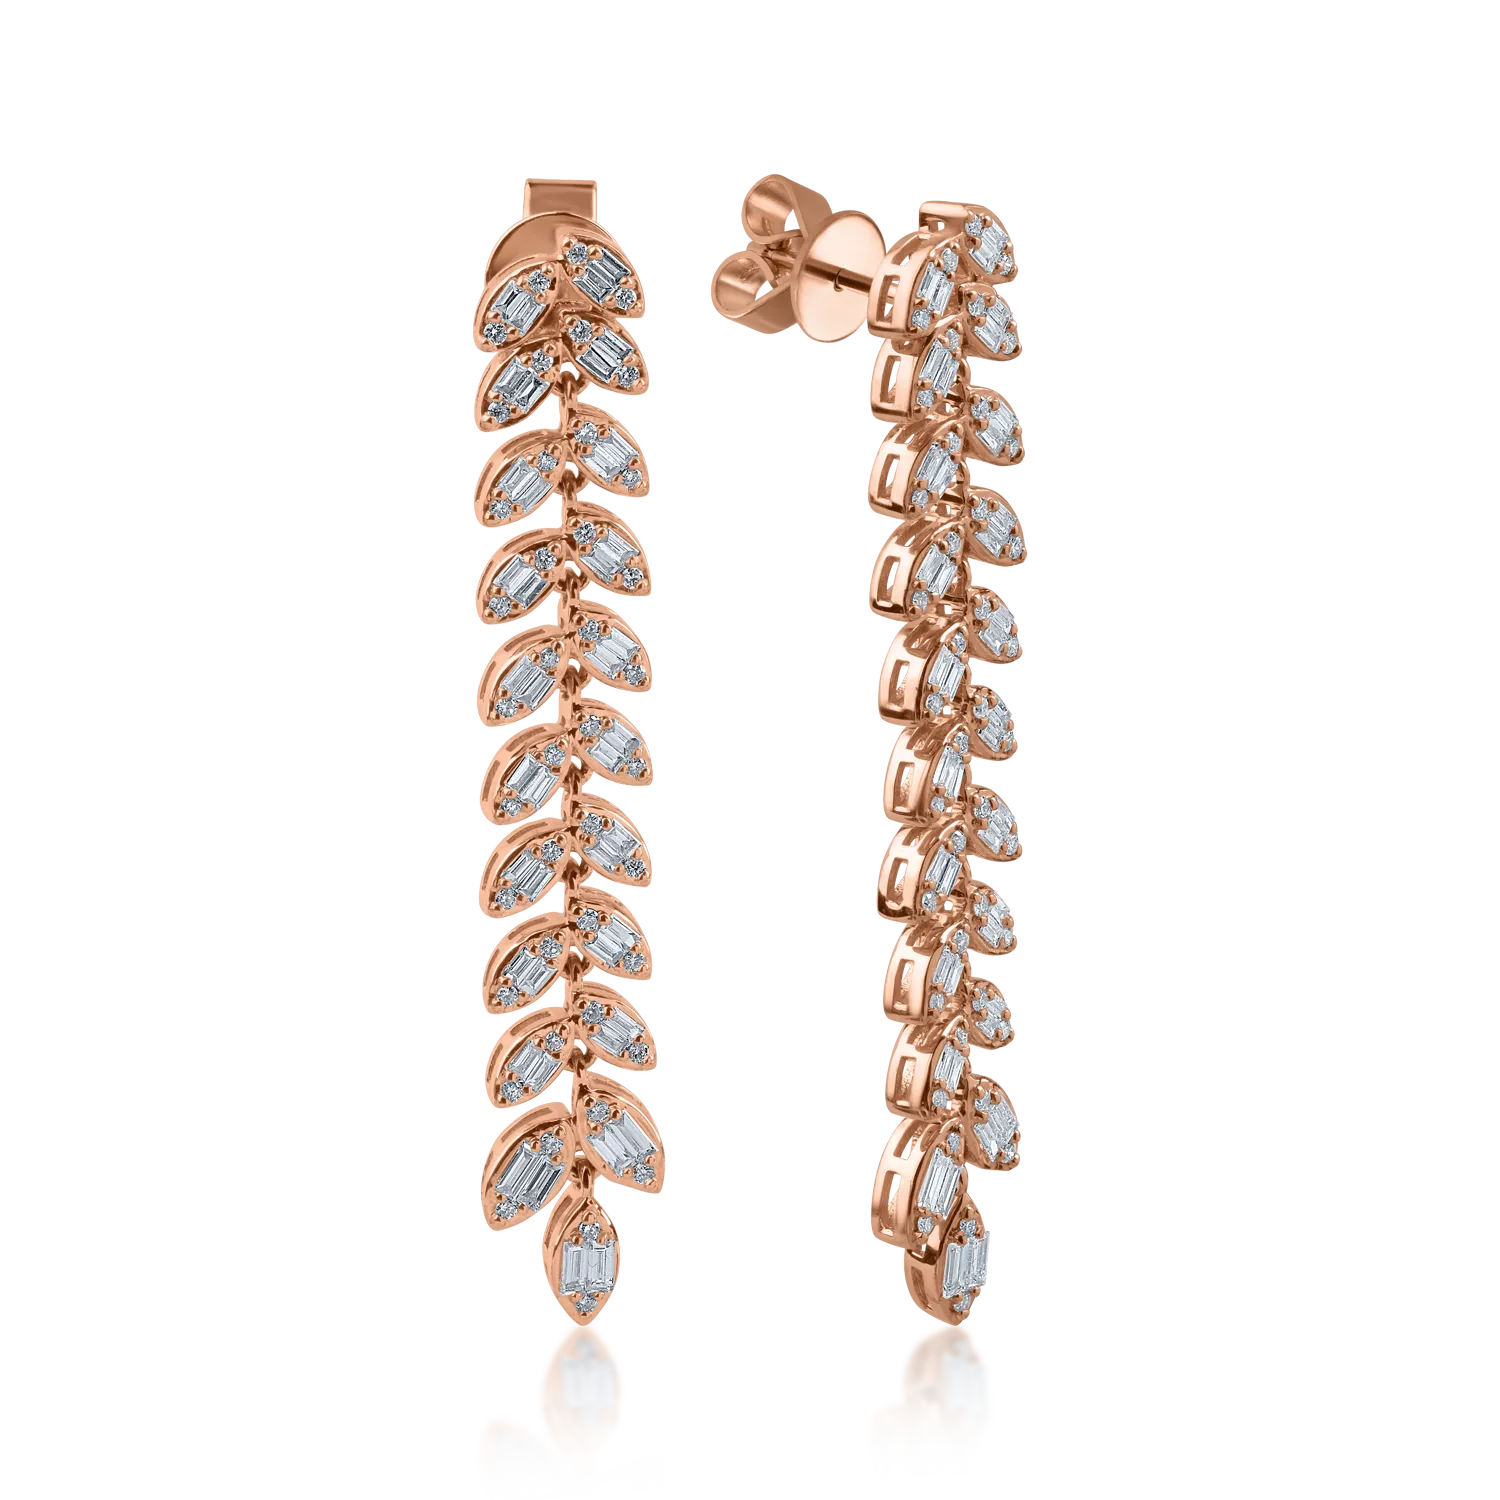 Rose gold earrings with 0.909ct diamonds